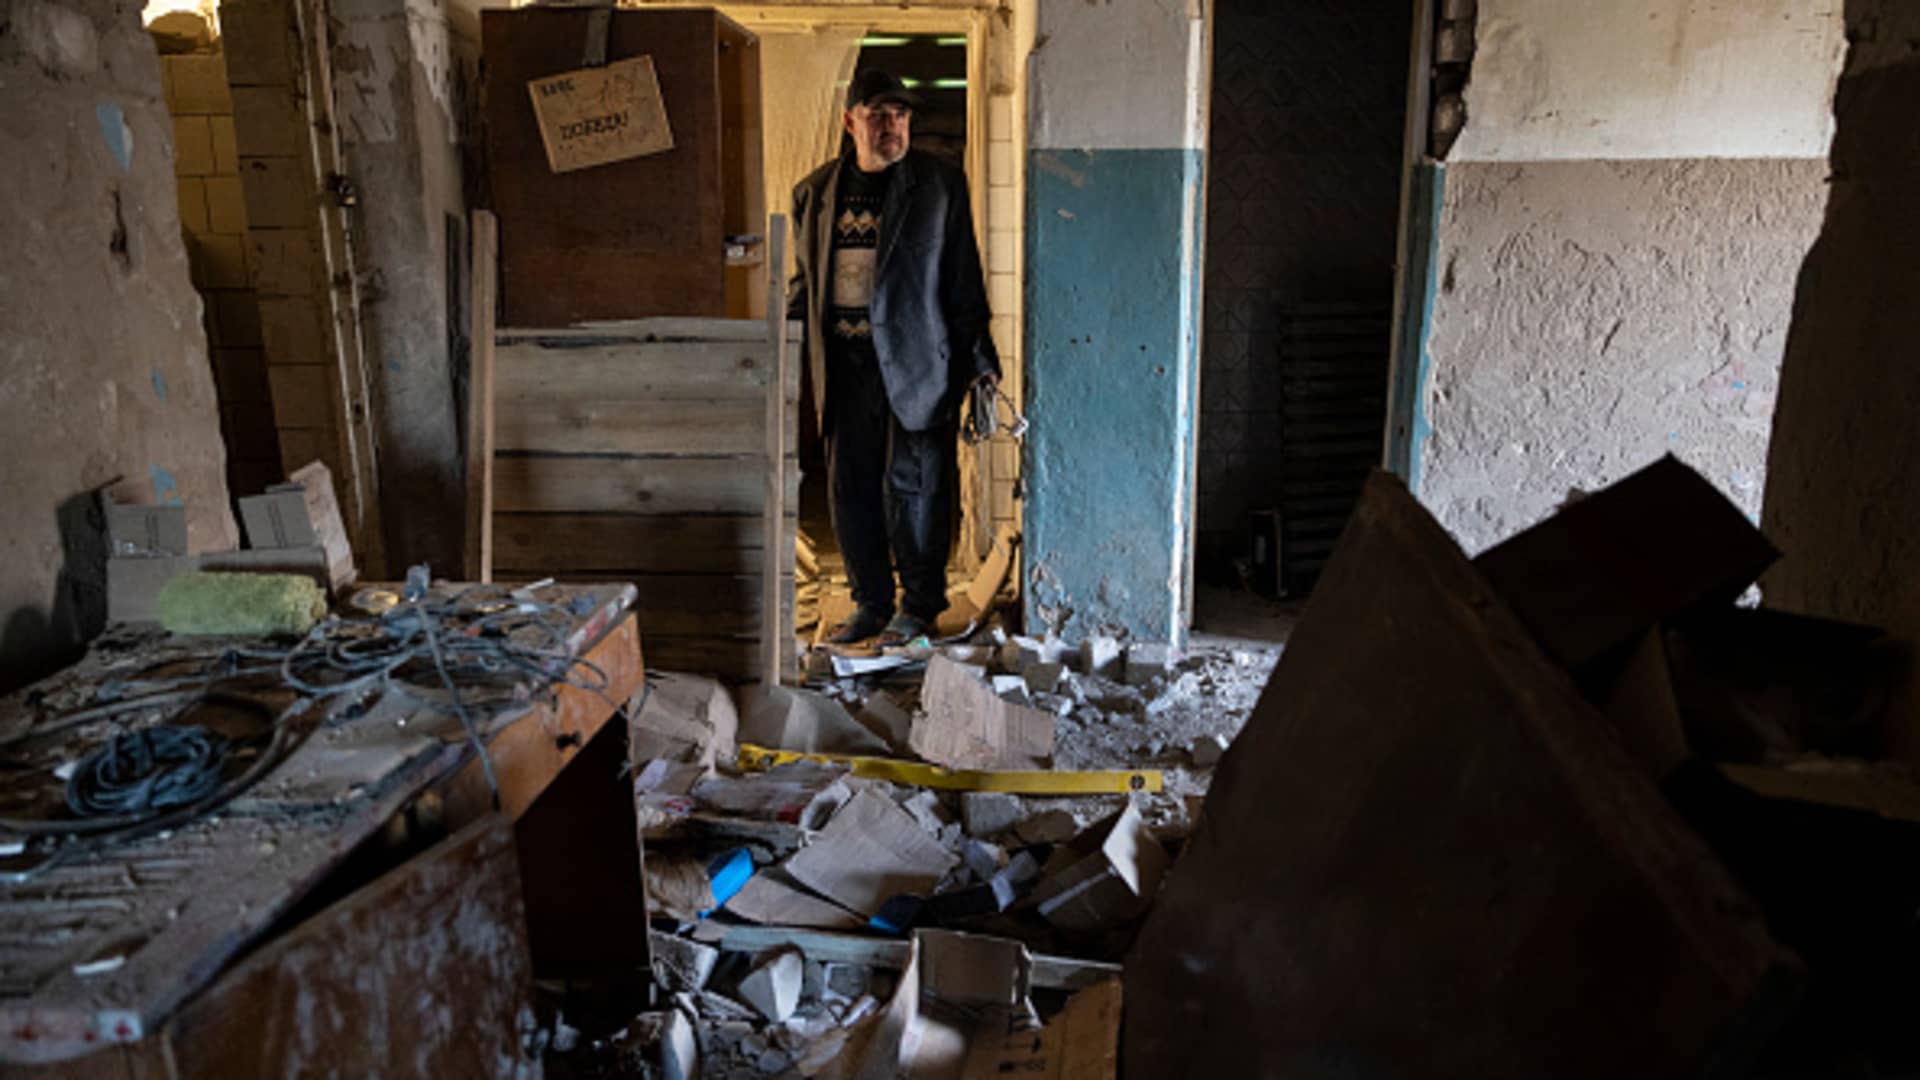 A man who claims to be a former prisoner, tortured with electric shocks by the Russian military, checks the debris inside a destroyed Russian command center on September 29, 2022 in Izium, Ukraine. On September 9th, Ukrainian armed forces hit the center that was known as a jail and torture chamber.